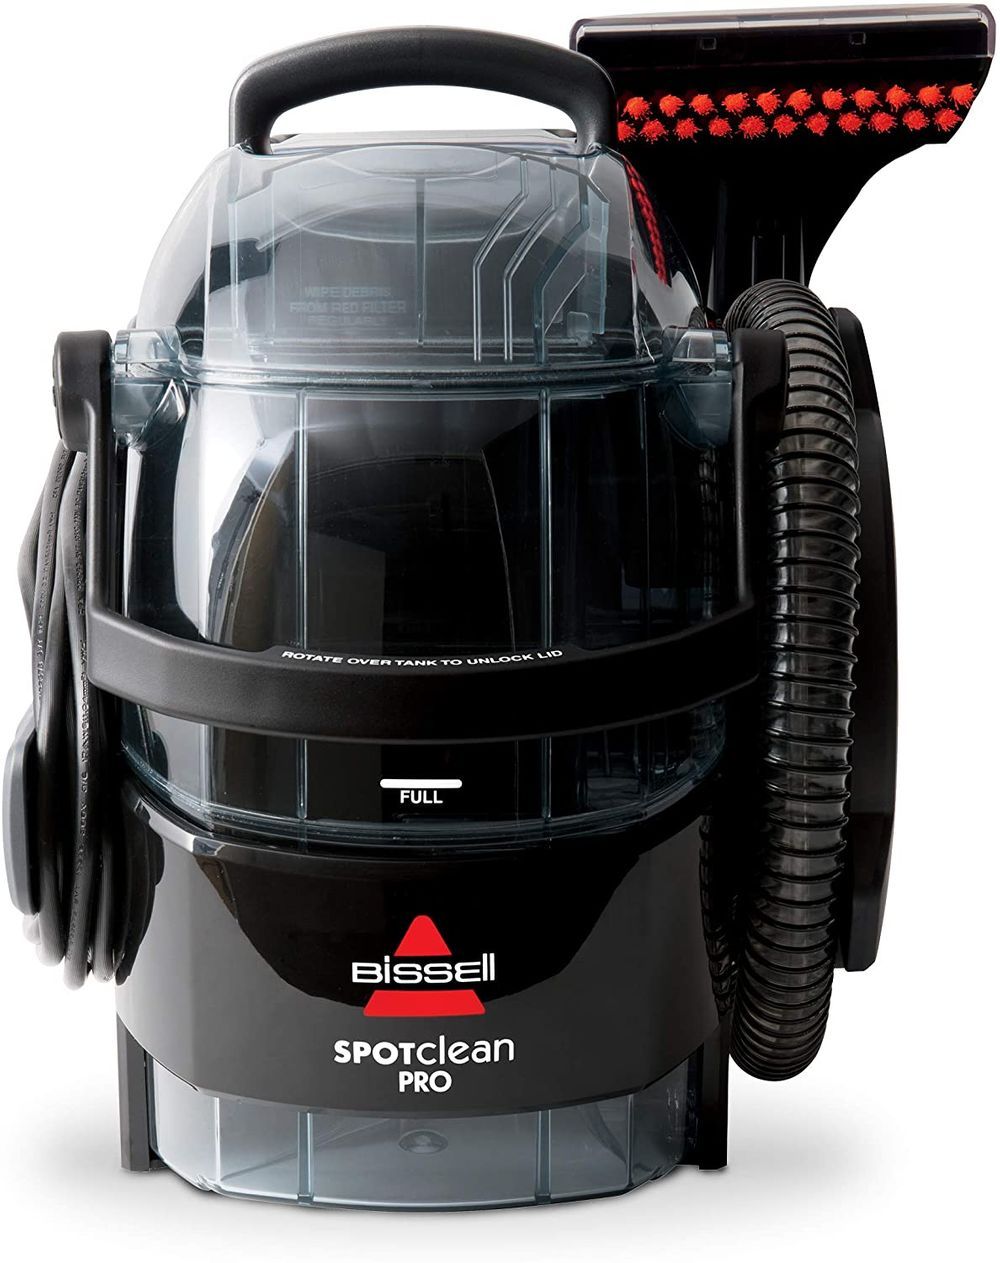 Bissell 3625 SpotClean Pro carpet Cleaner Product Image